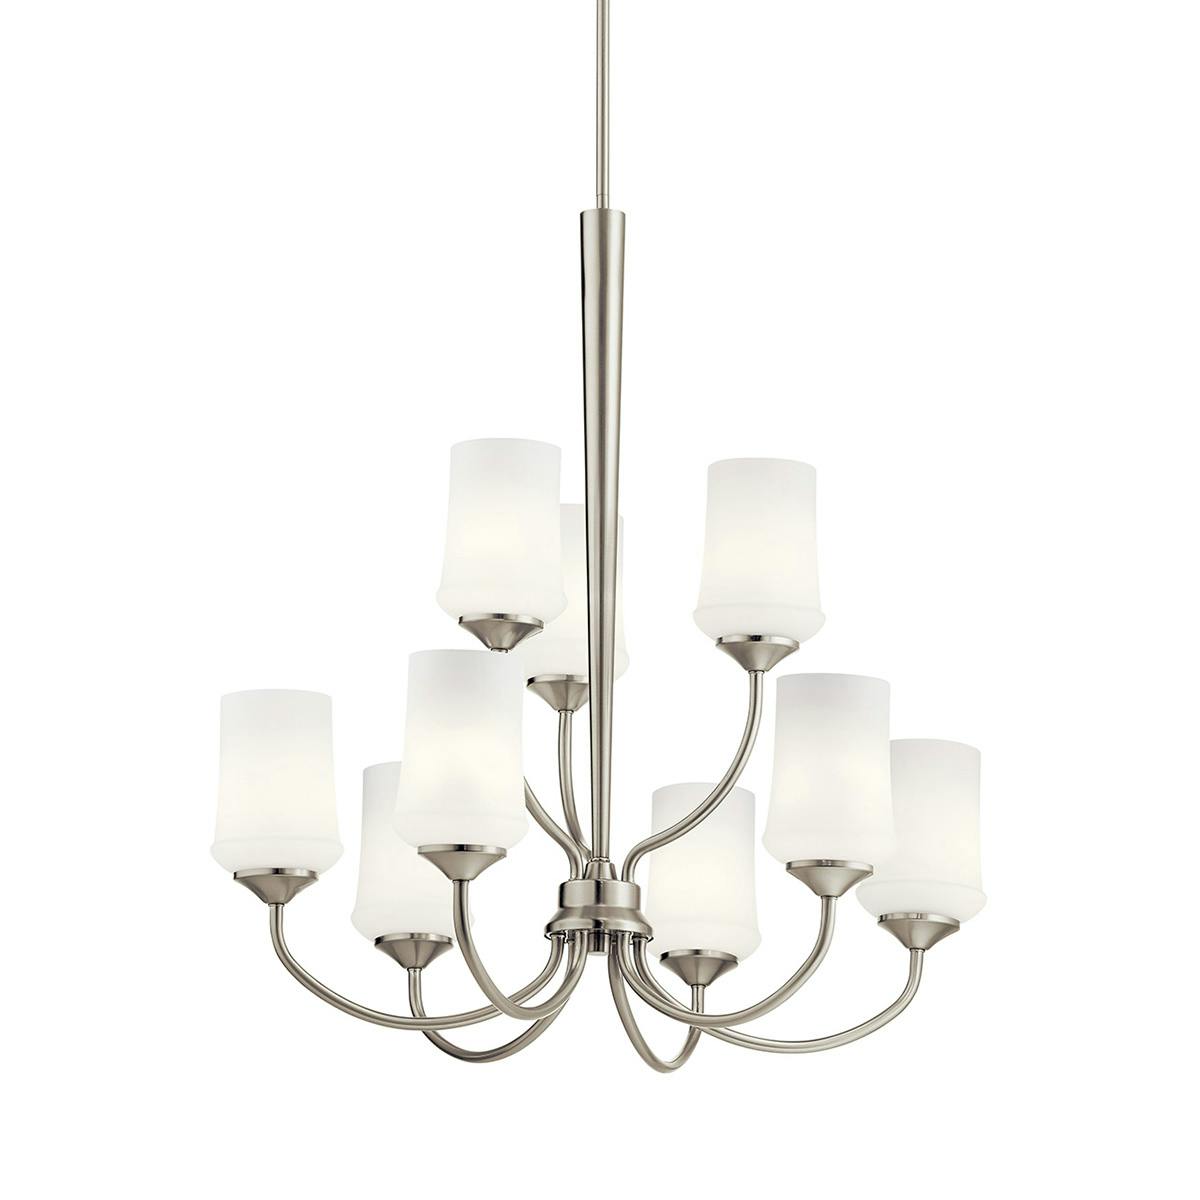 Aubrey 31.25" 2 Tier Chandelier in Nickel without the canopy on a white background